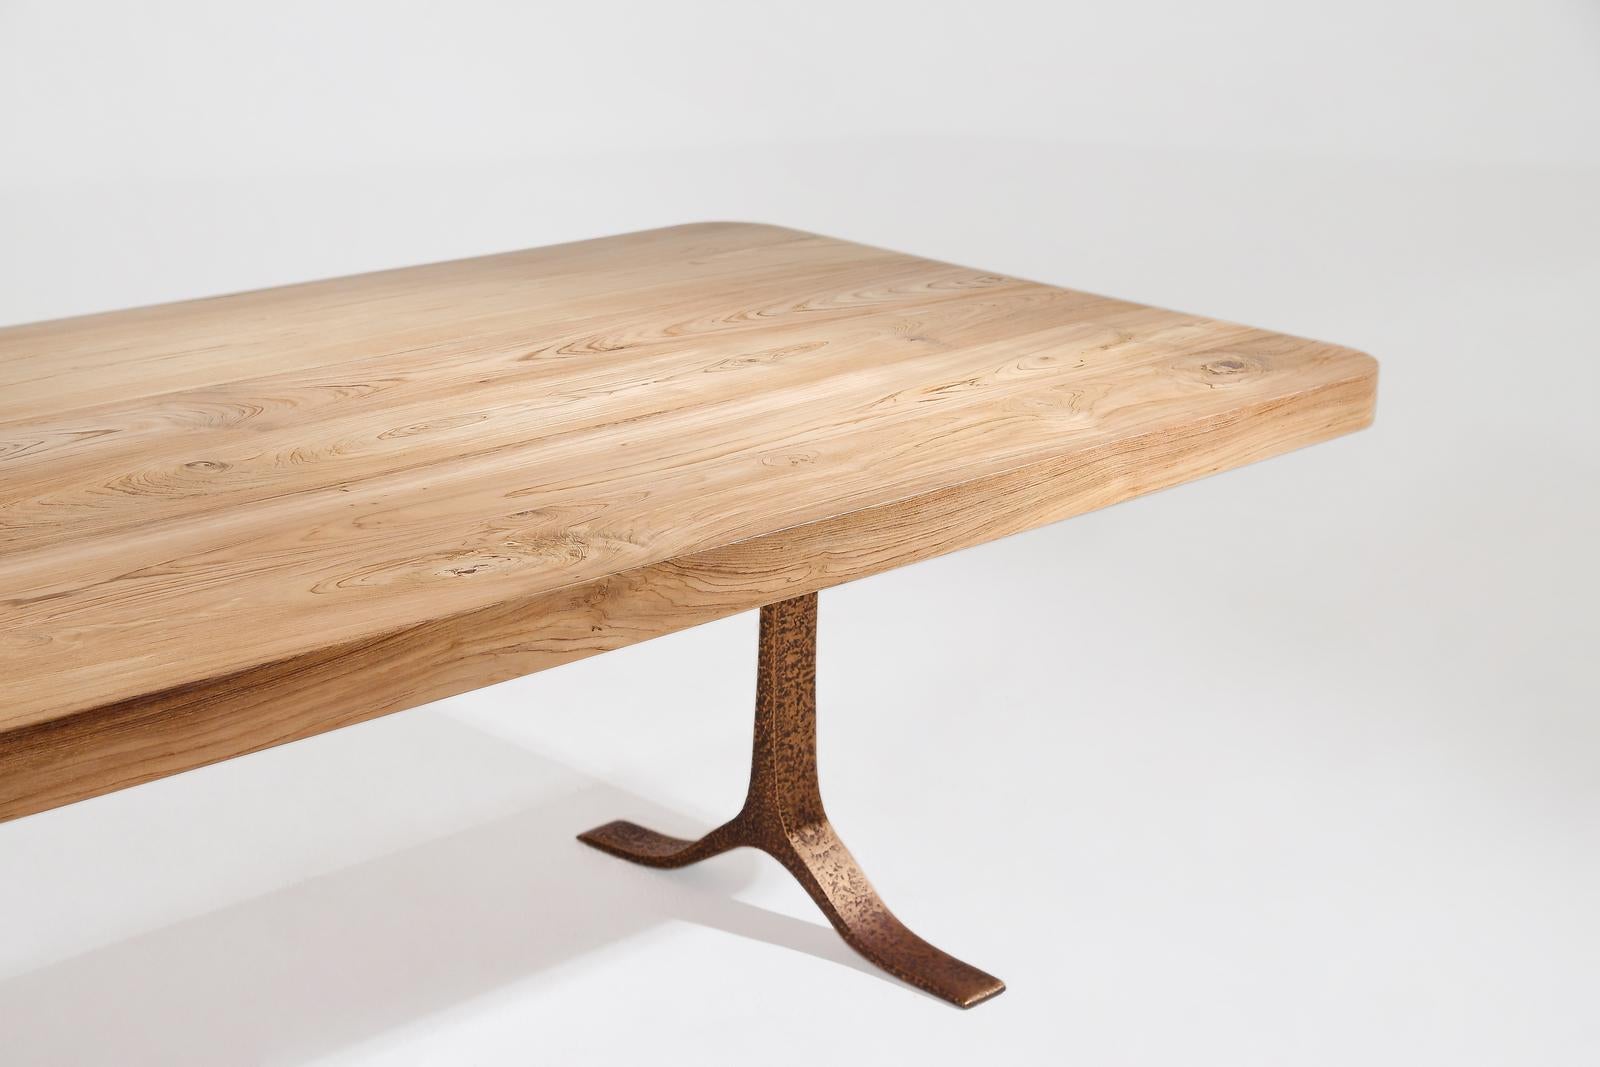 Bespoke Dining Table, Reclaimed Wood, Sand Cast Bronze Base, by P. Tendercool For Sale 3